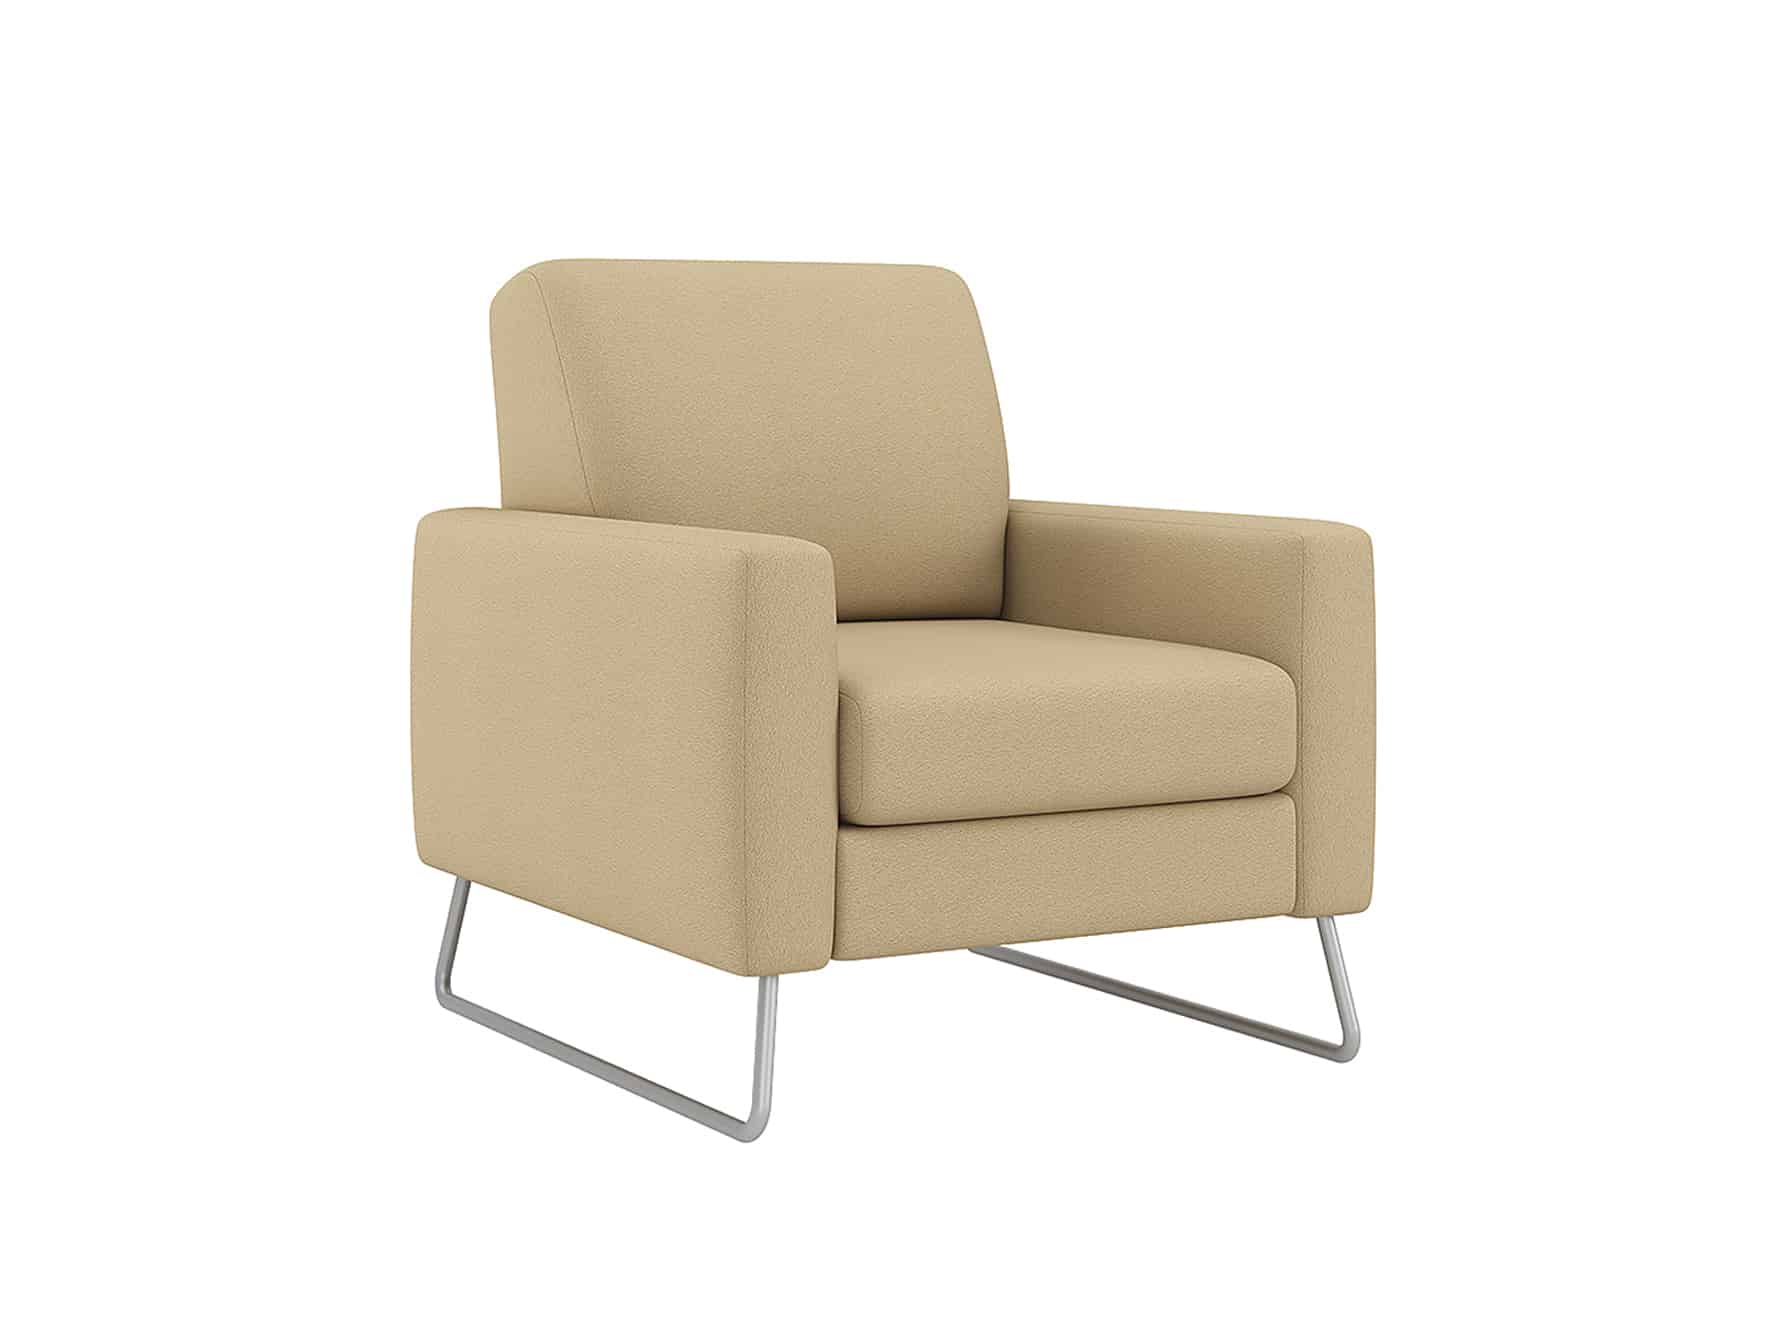 Side view of Chill Chair with Tubular Metal Leg